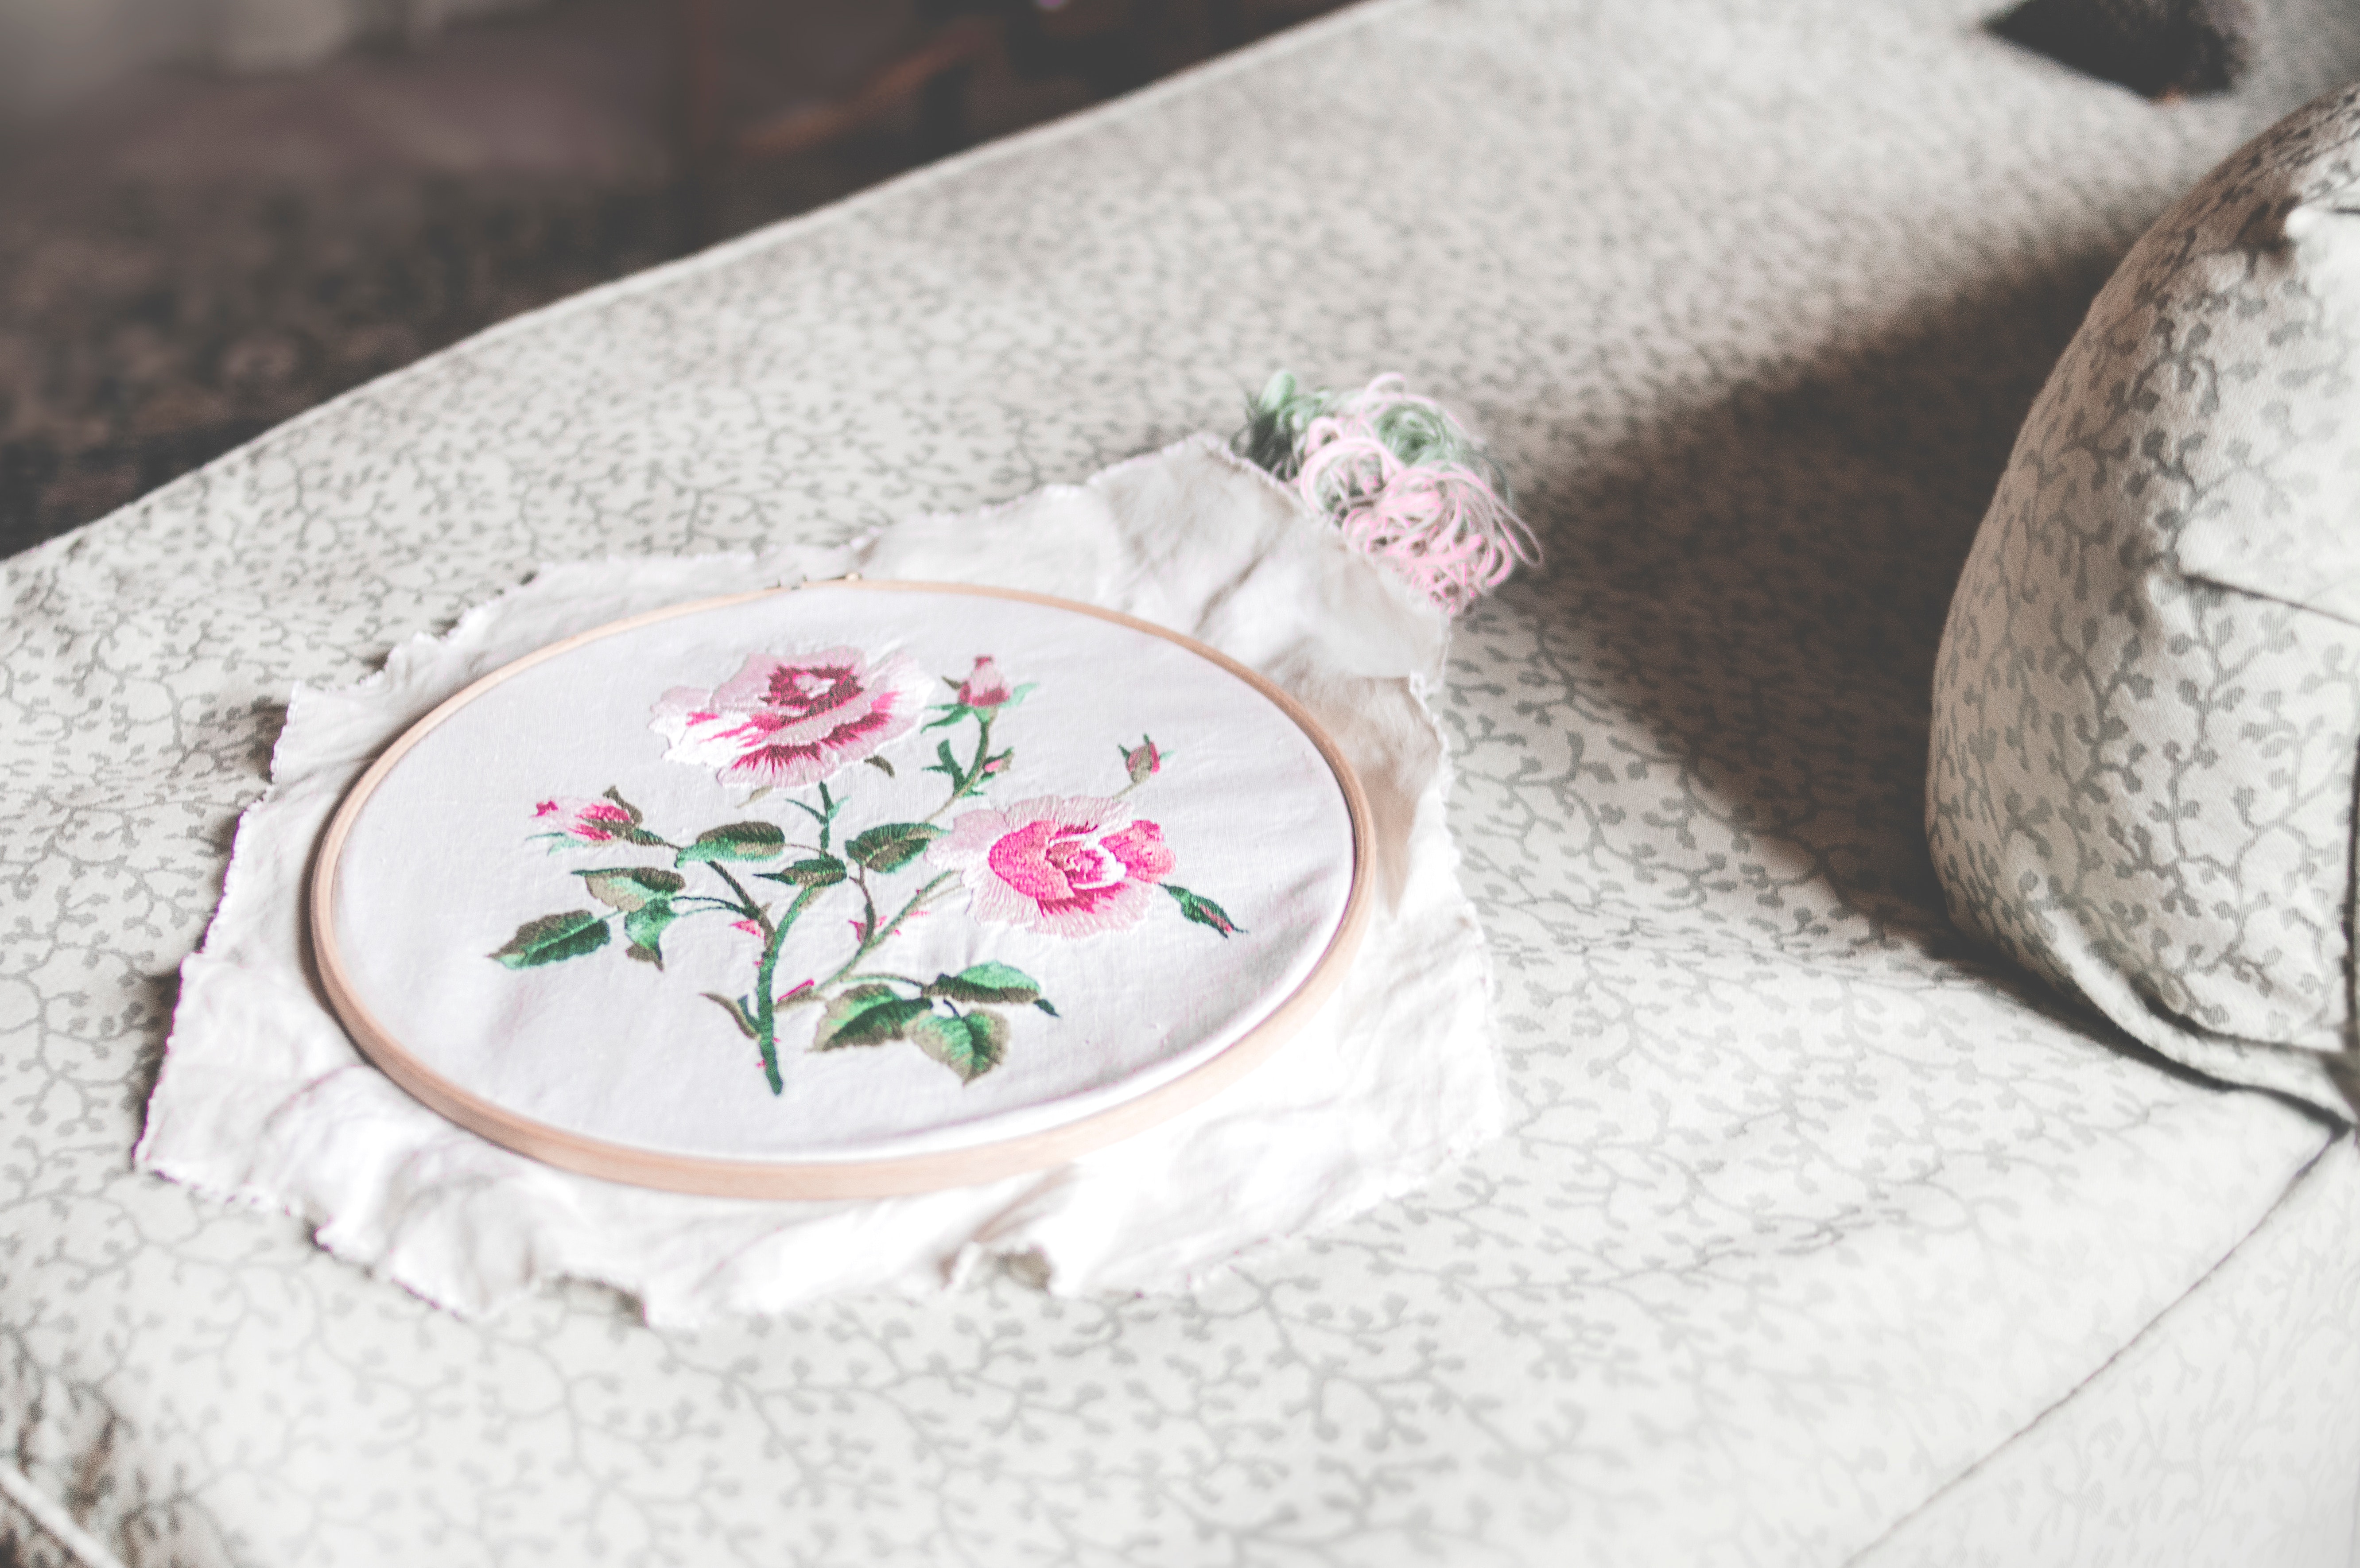 embroidered rose in a hoop on a calming table